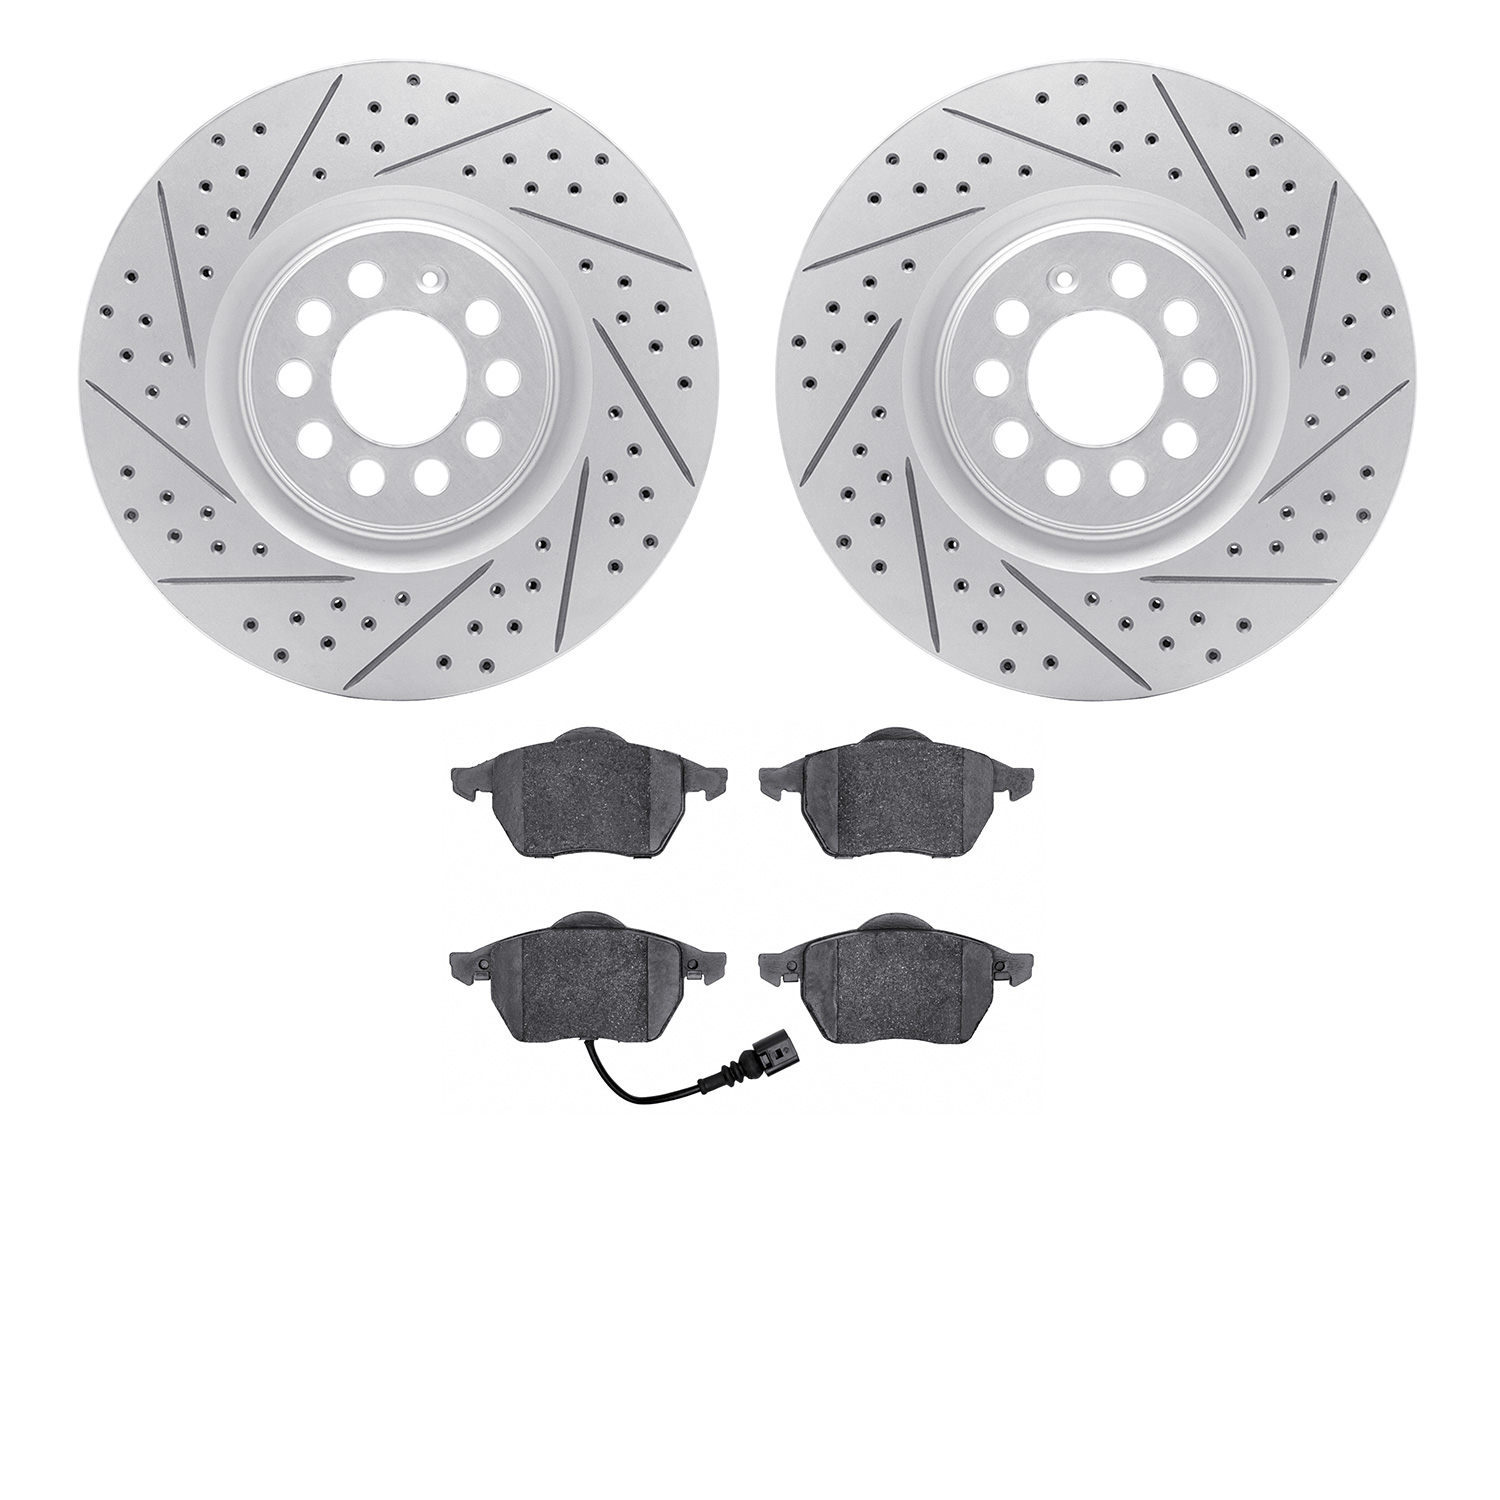 2502-74028 Geoperformance Drilled/Slotted Rotors w/5000 Advanced Brake Pads Kit, 2003-2006 Audi/Volkswagen, Position: Front